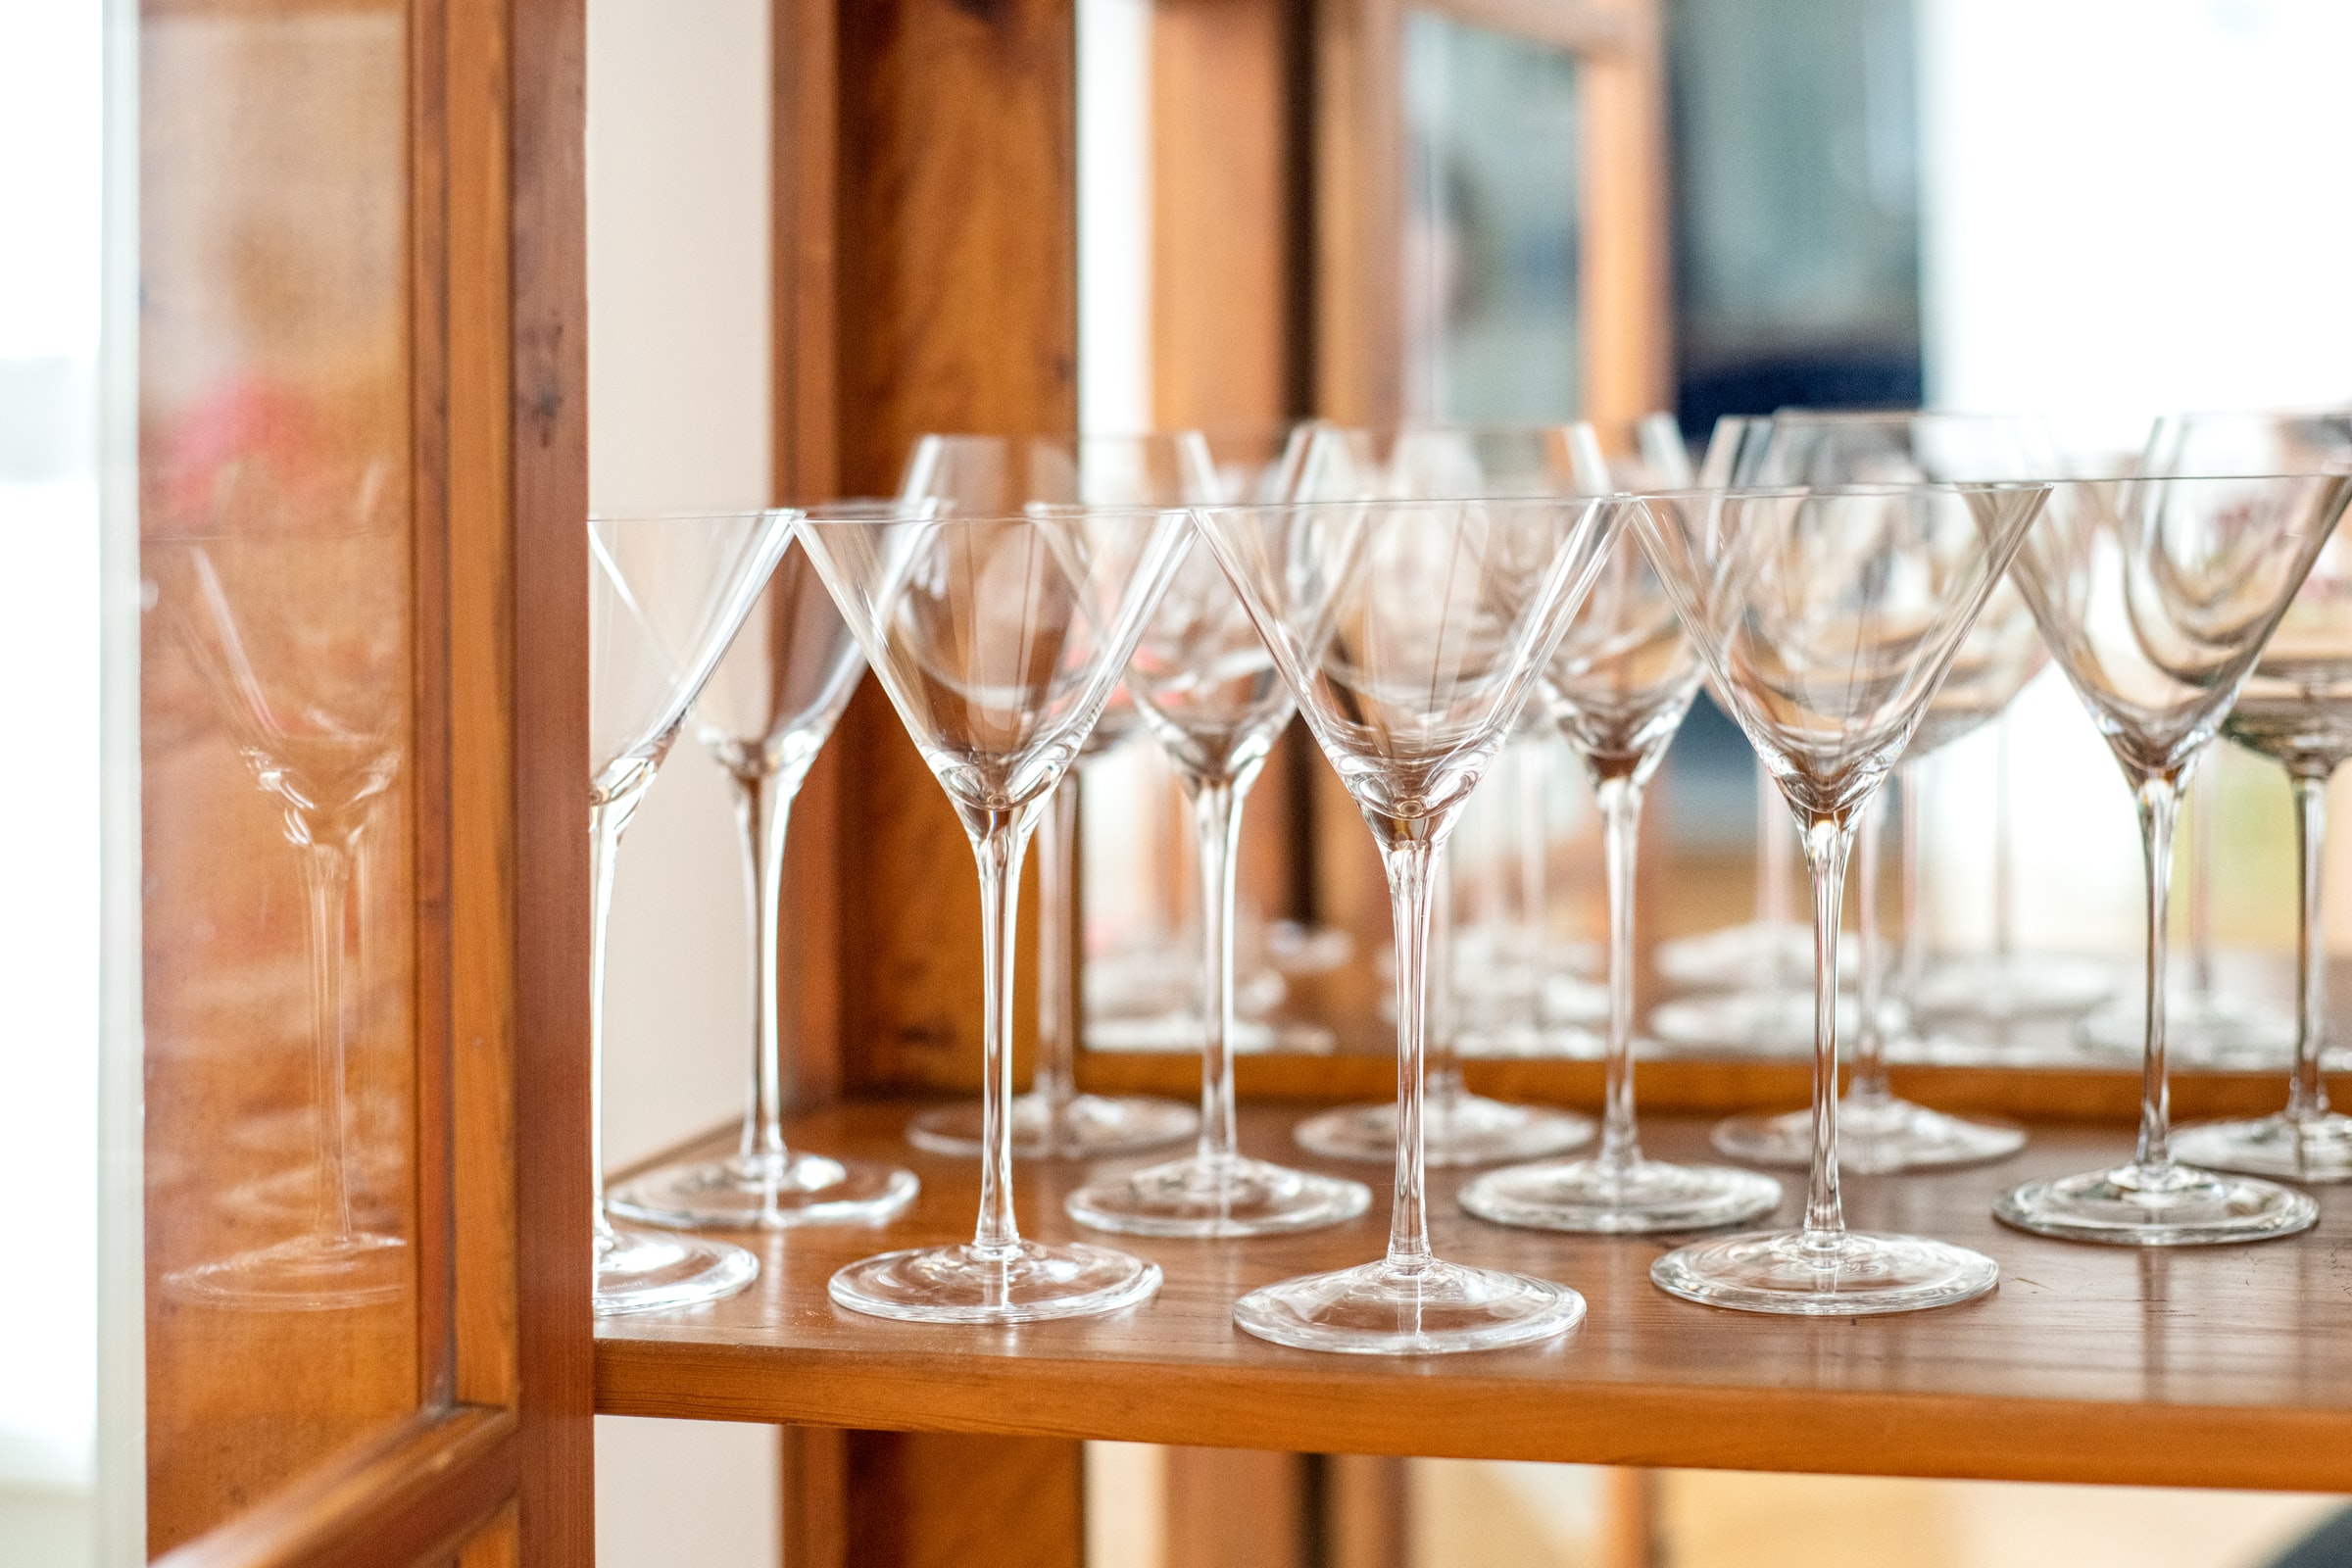 Rows of martini glasses in a wooden cabinet